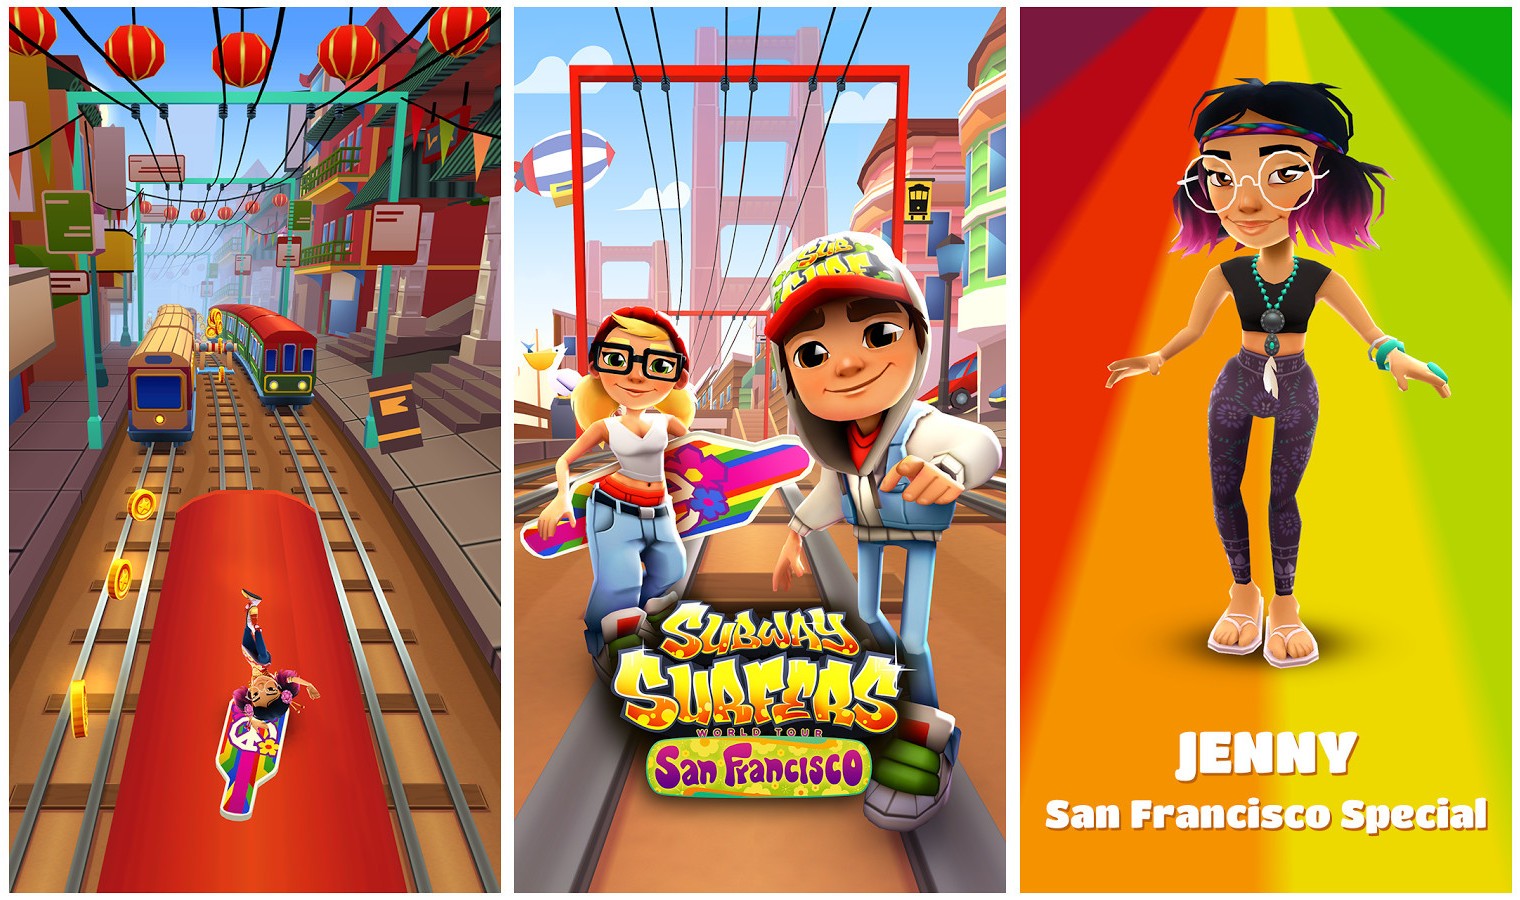 Subway Surfers - Official Homepage